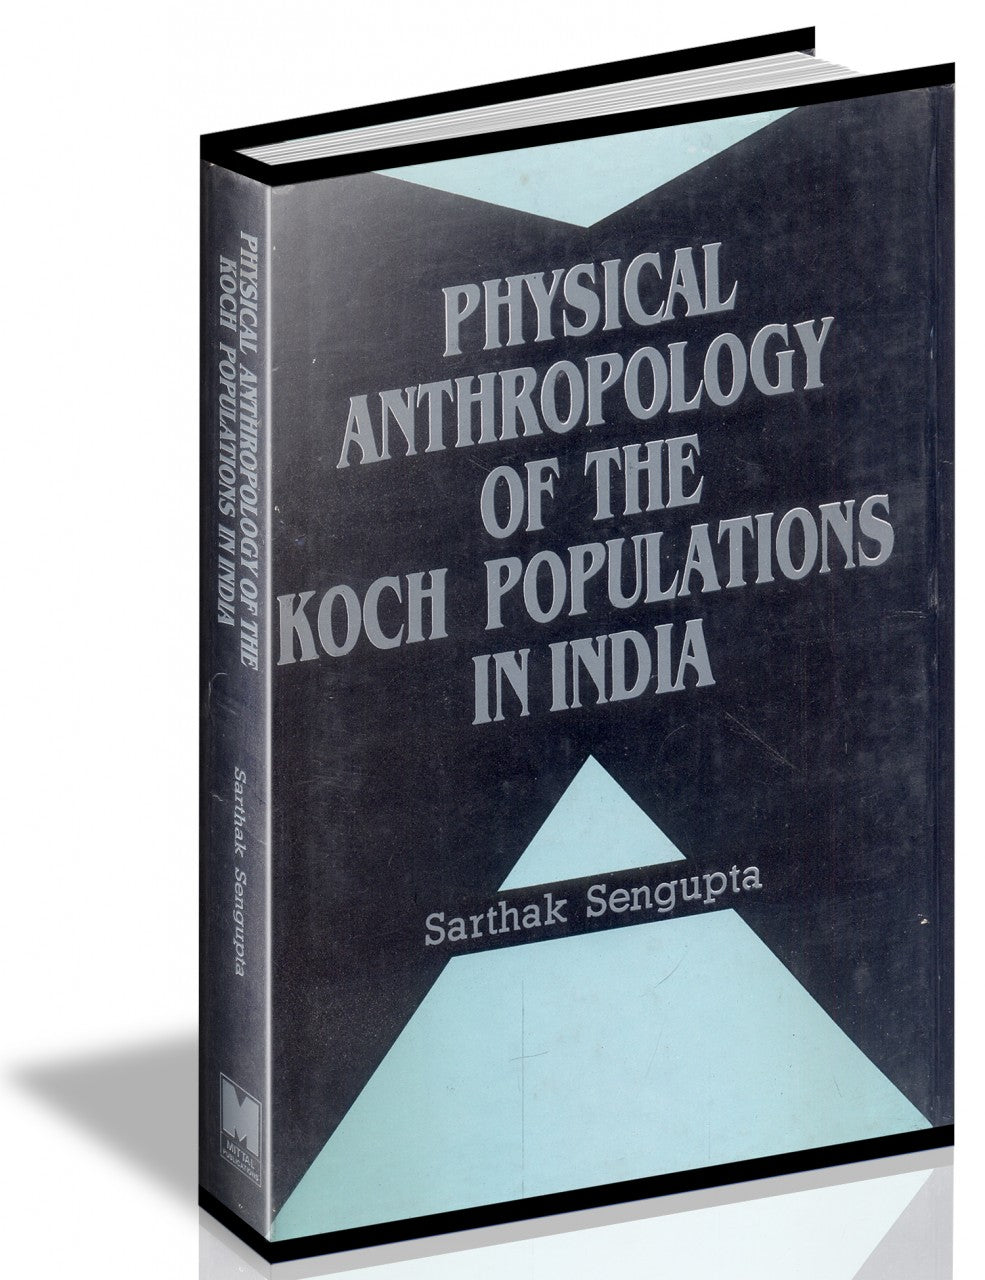 Physical Anthropology Of The Koch Populations Of India